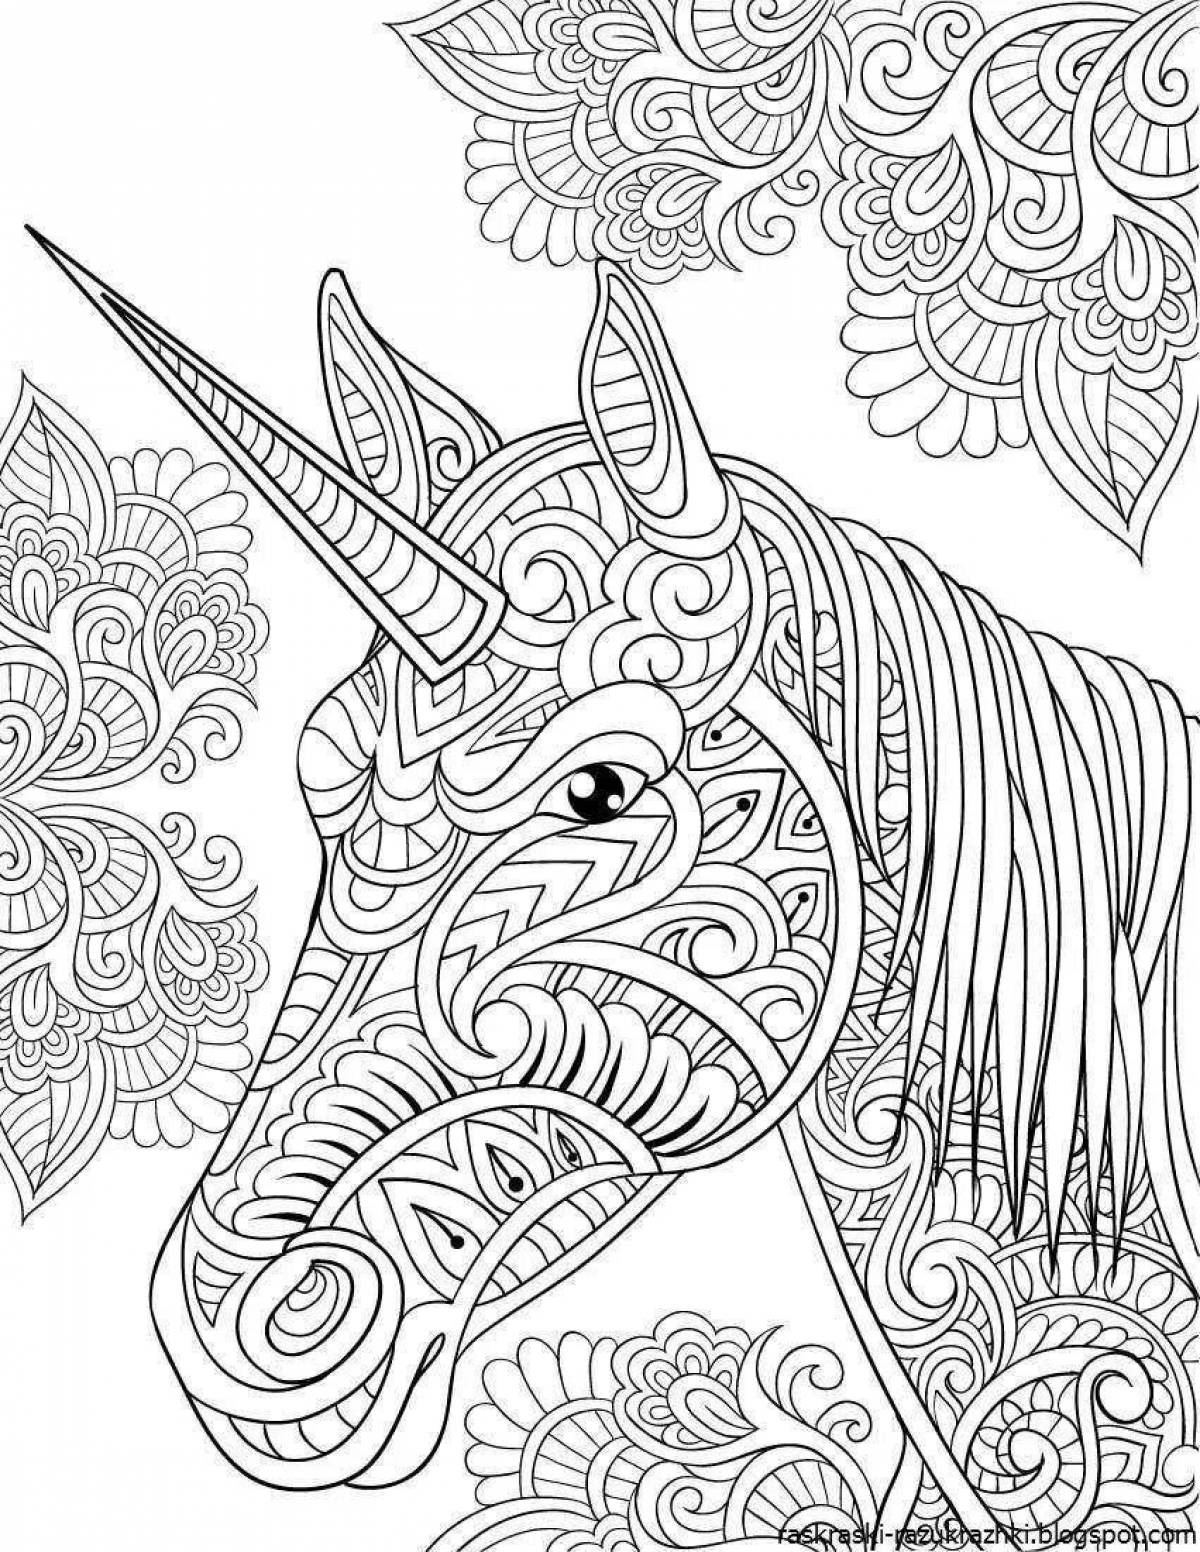 Great complex anti-stress coloring book